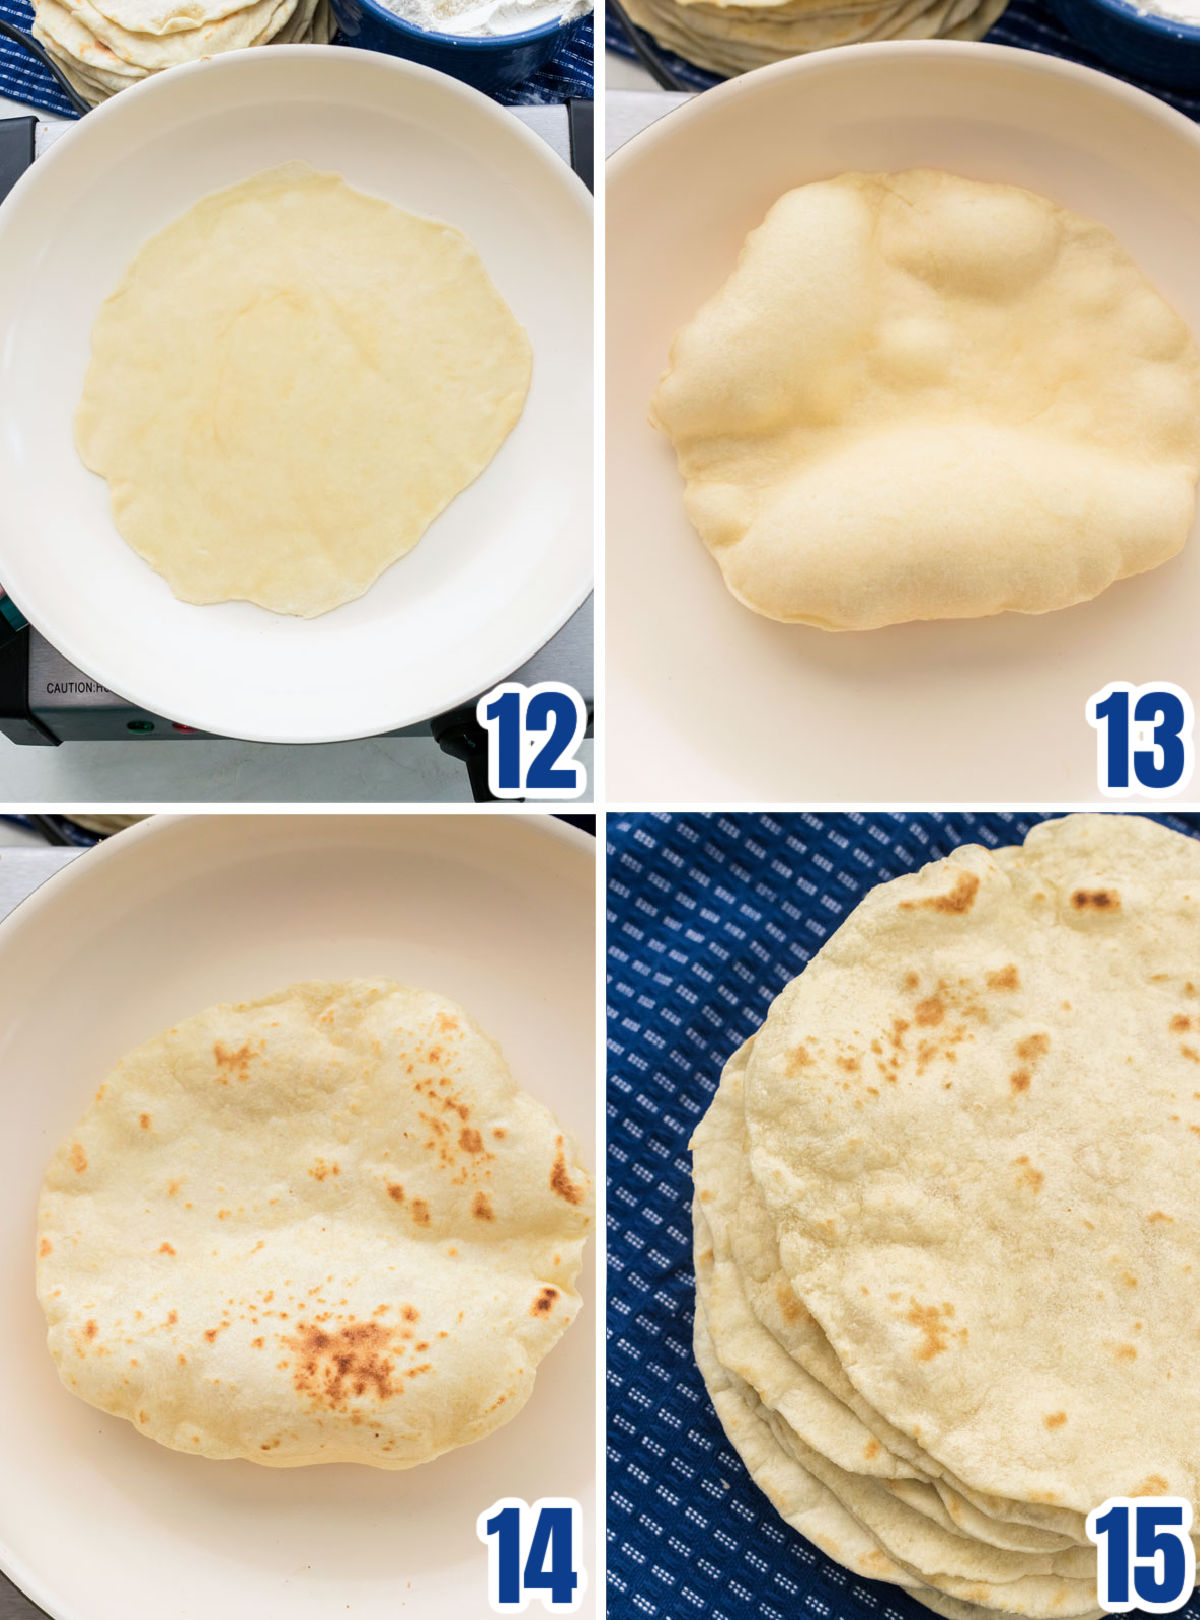 Collage image showing the steps for cooking the tortillas in a pan on the stove.